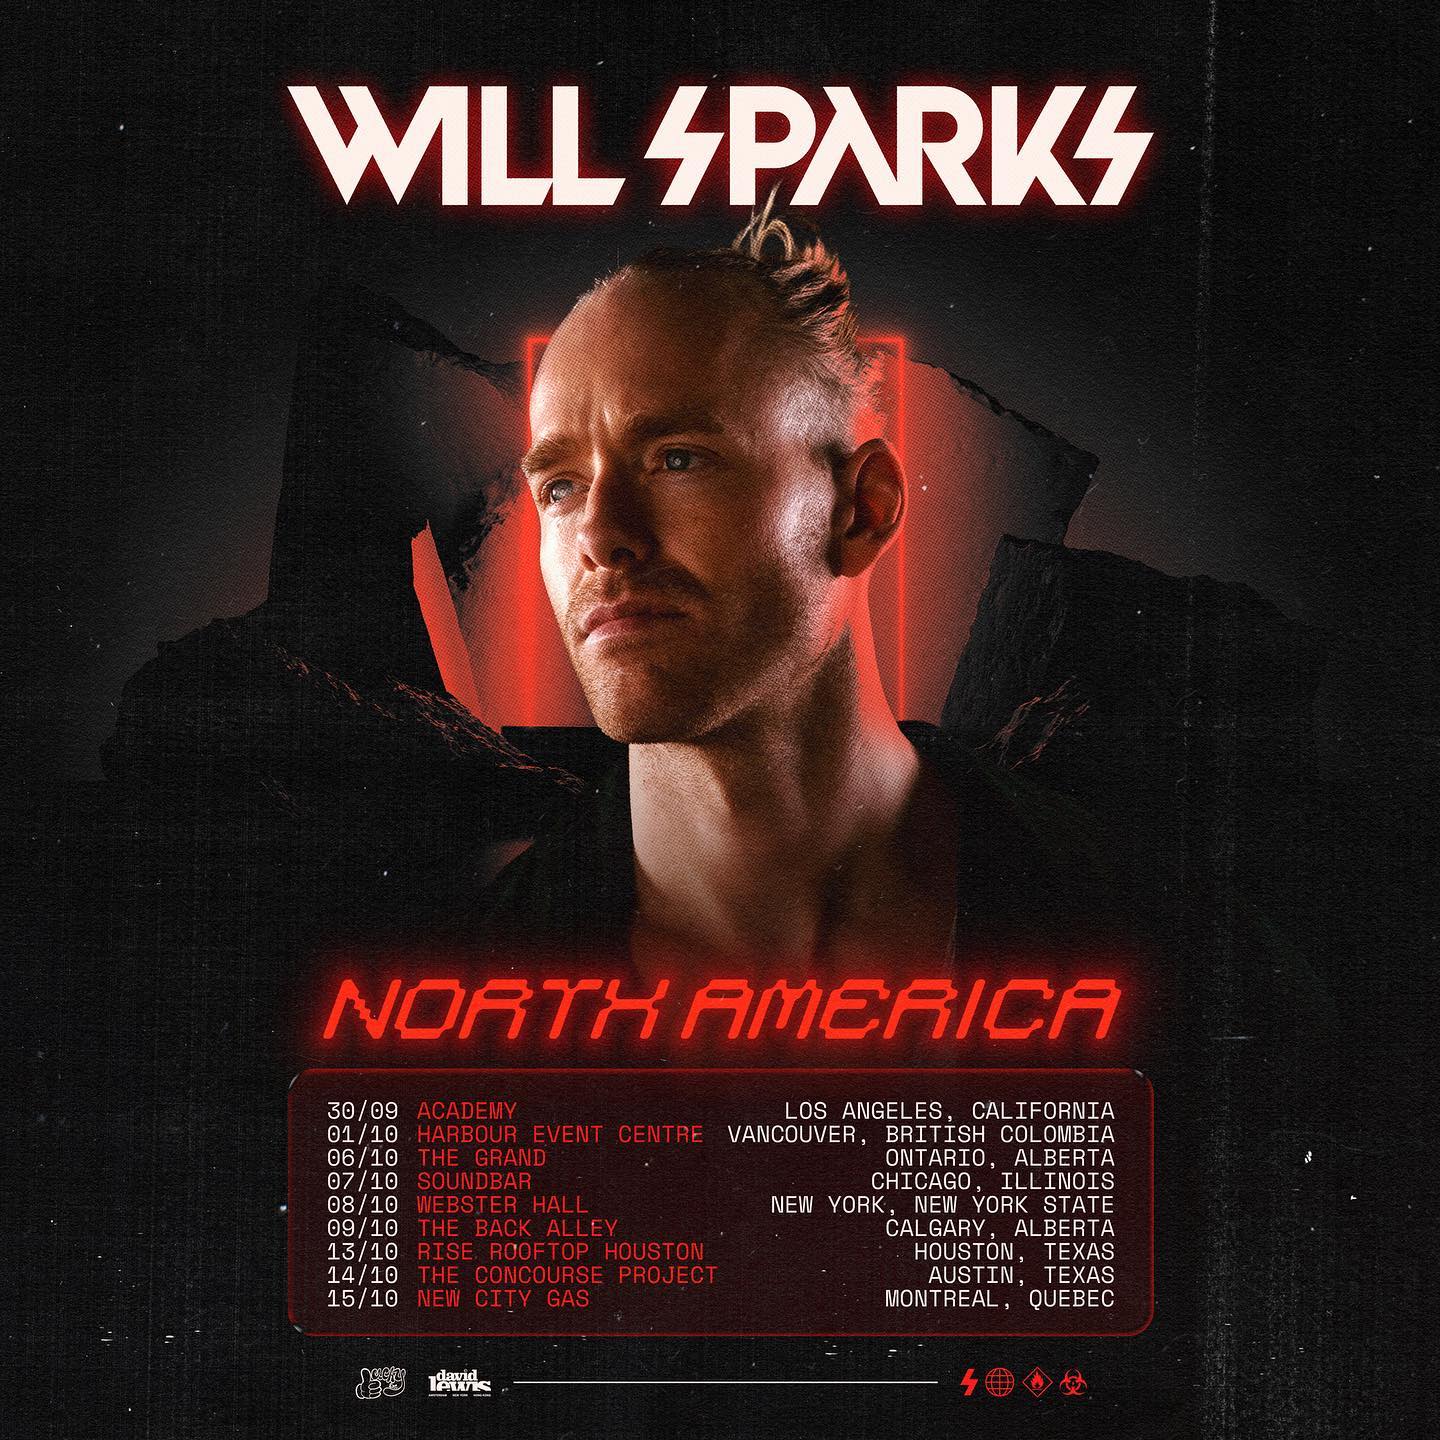 will sparks tour dates